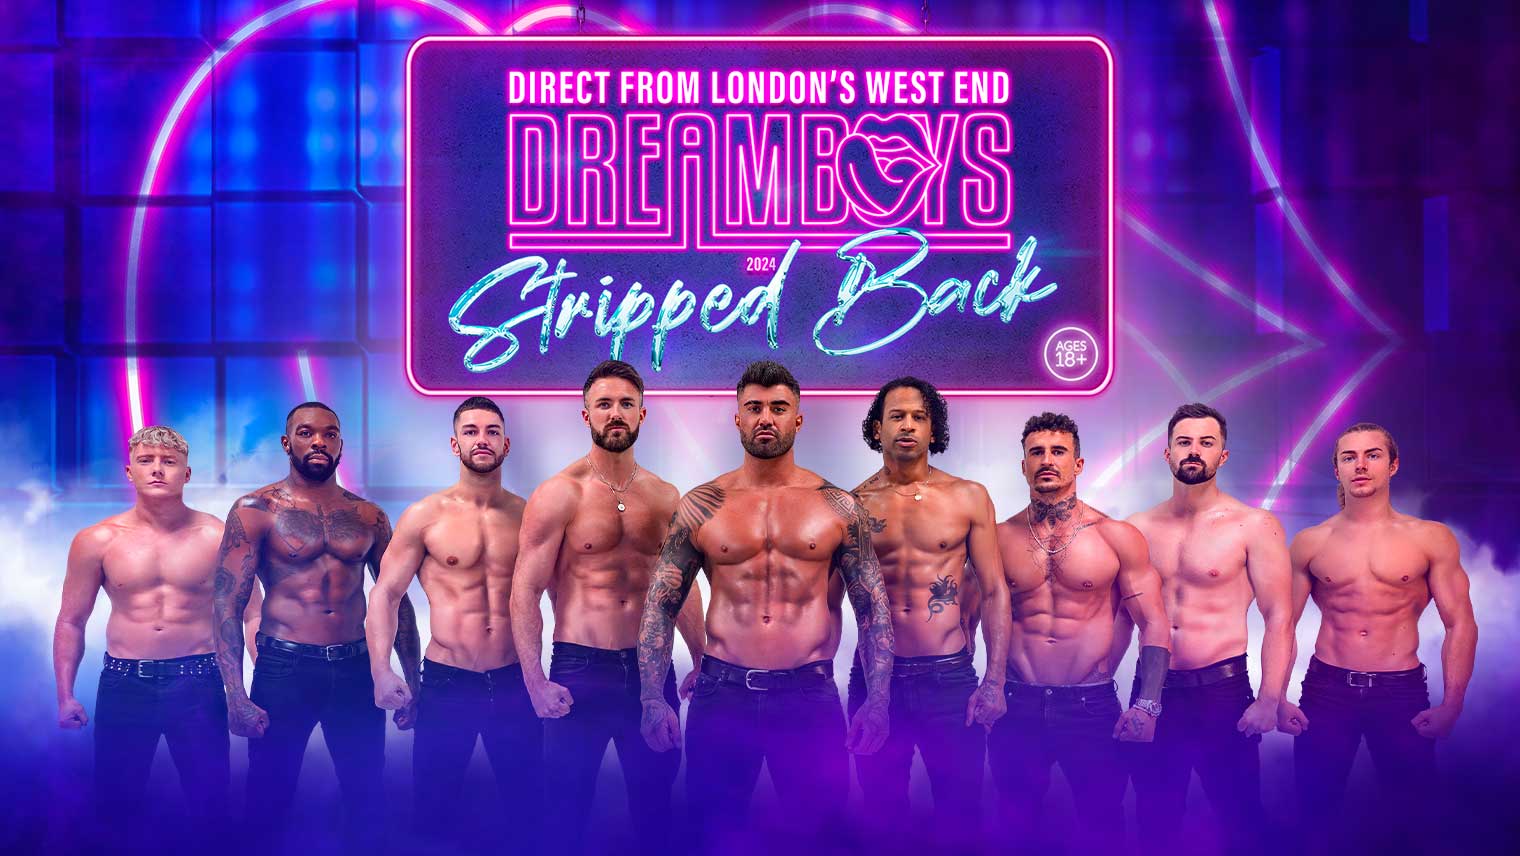 male strip show blog | Dreamboys bring their "Stripped Back" 2024 Worldwide Tour to PRYZM in Brighton!